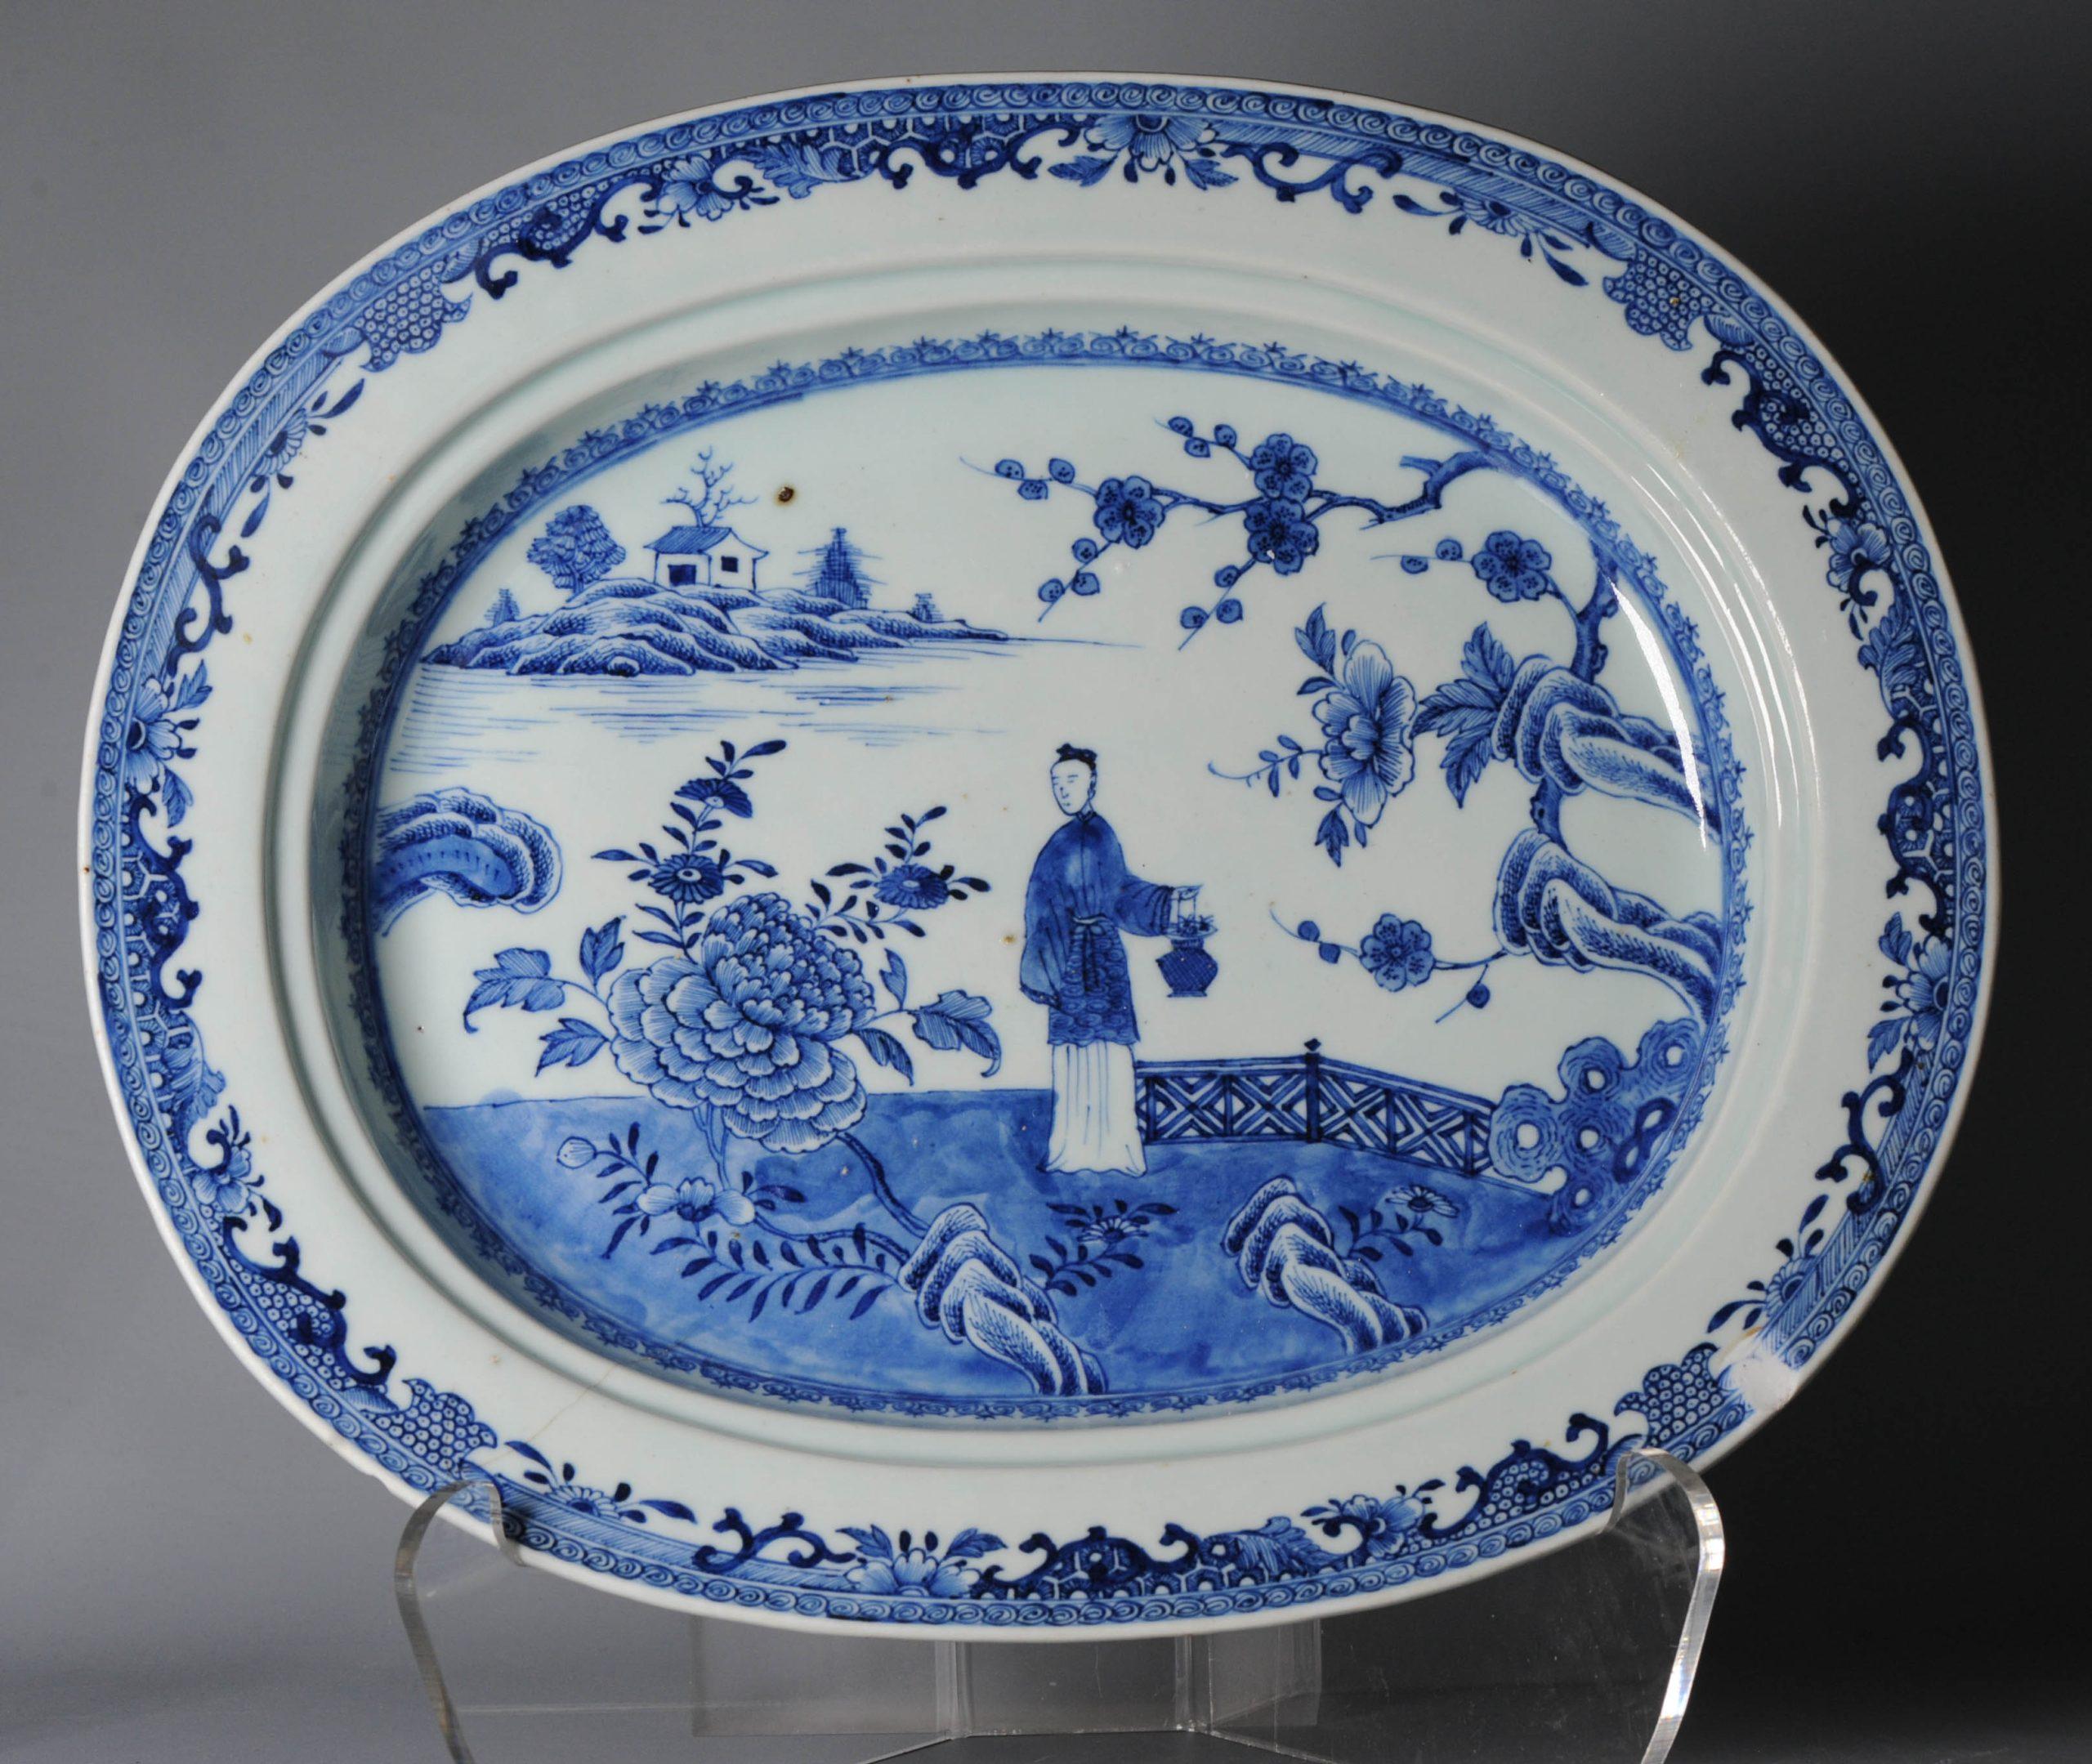 This piece as a hot water serving charger, 18th century, Qing period. We all know the hot water dishes but a piece of this size is unique in the history of our company. The idea is to pour hot water in the serving charger and then add the lid with